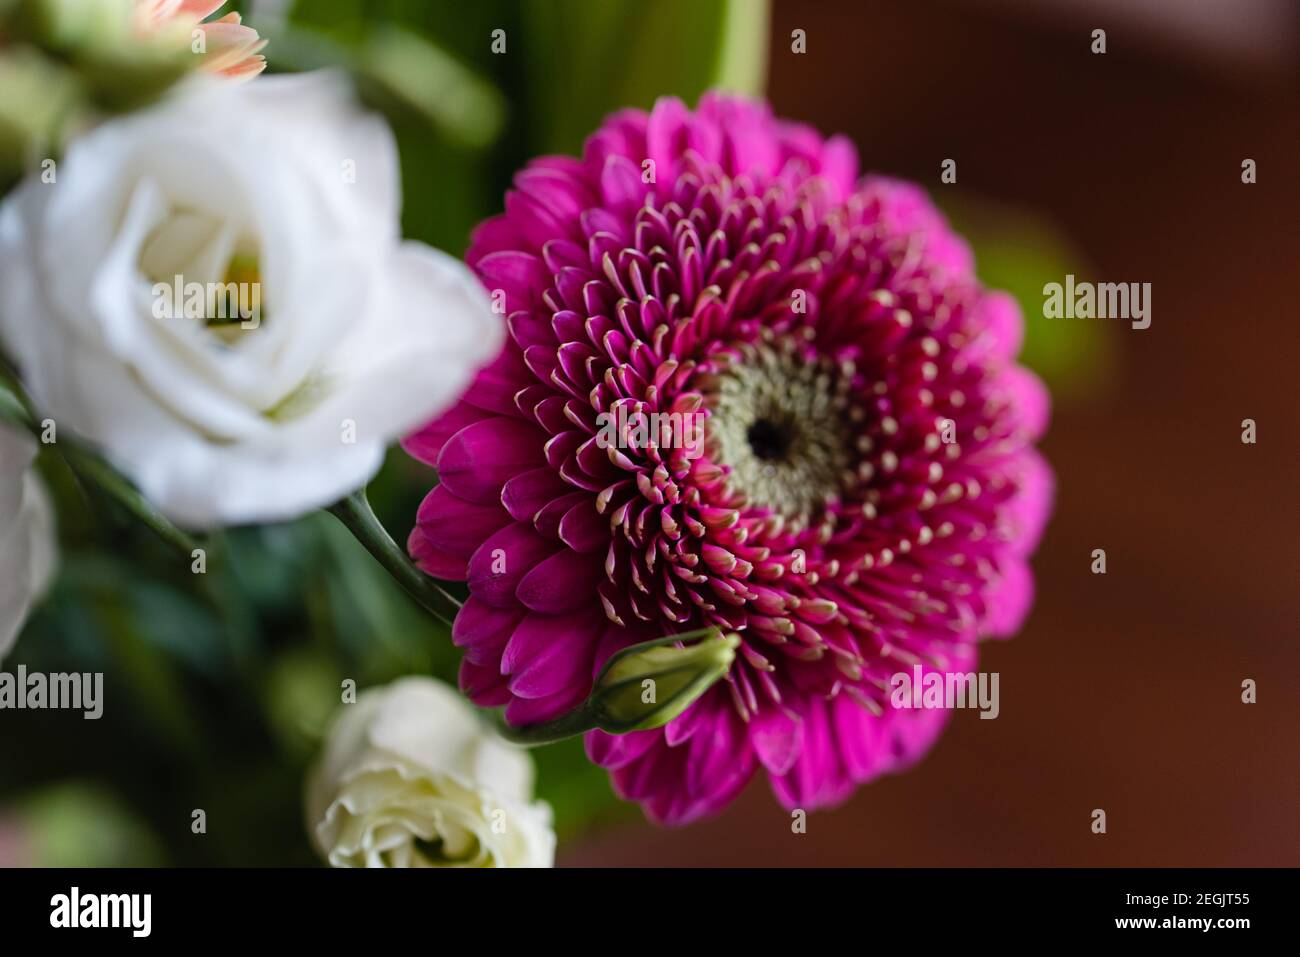 Close up of a bouquet of pink and white flowers. Stock Photo